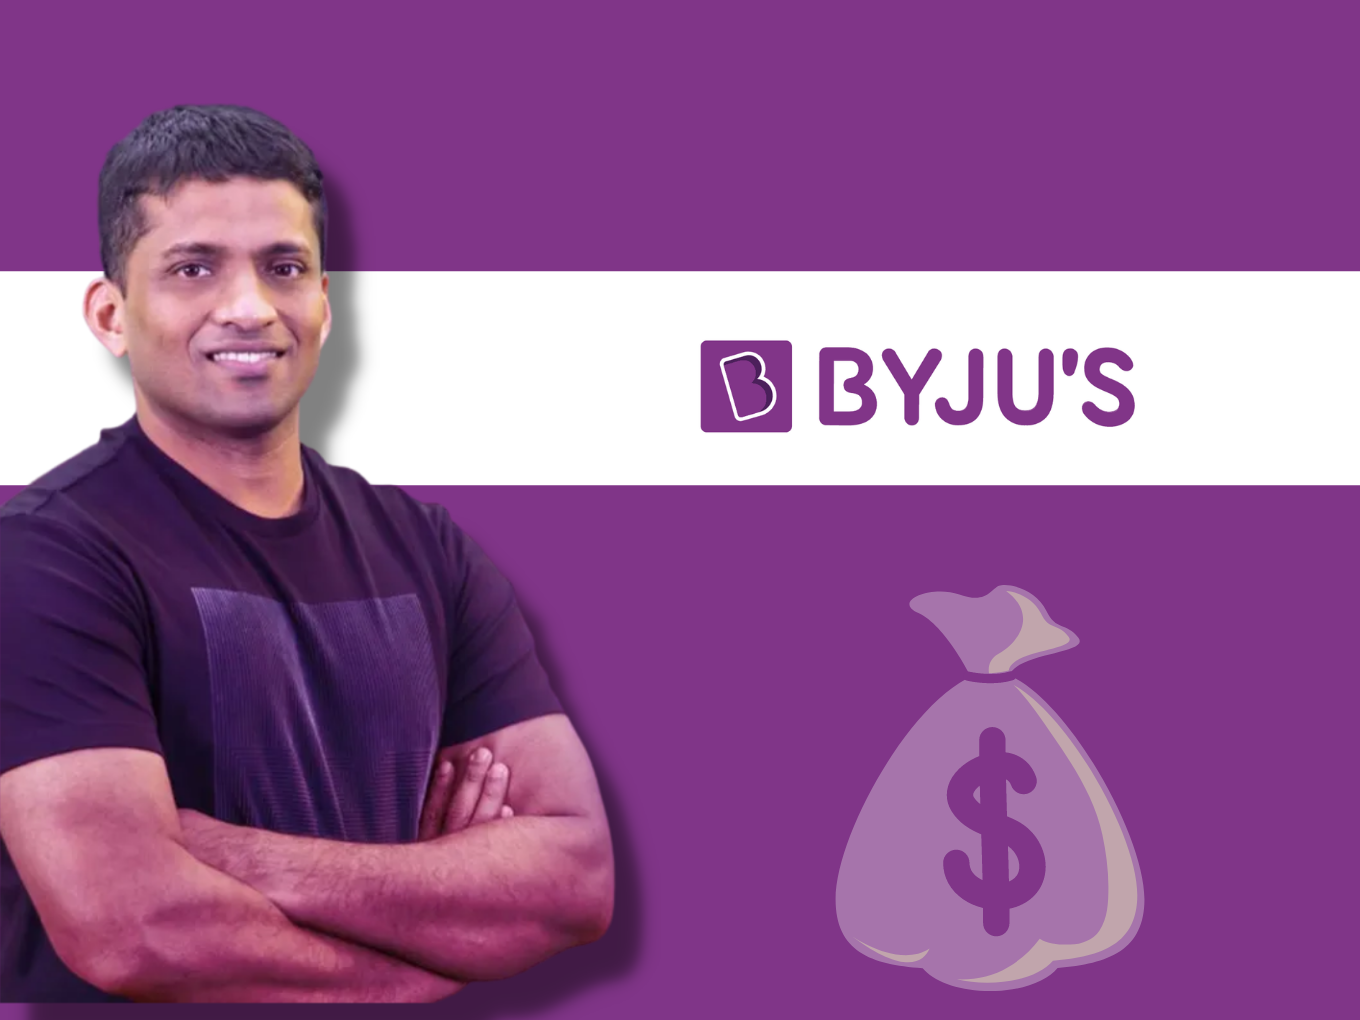 BYJU’s Spent Nearly 3X In Marketing Than Unacademy, Vedantu & upGrad Combined